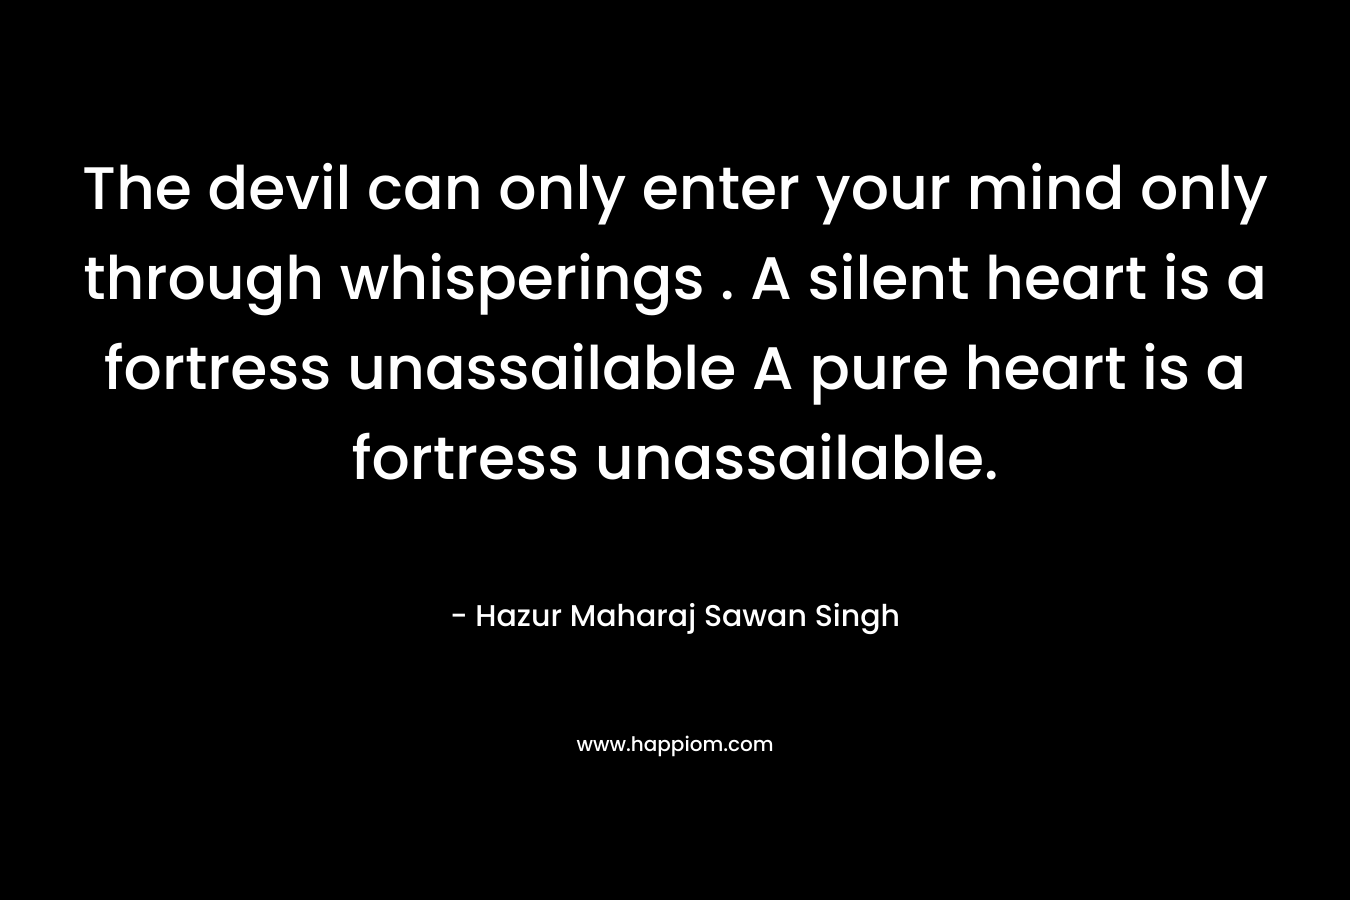 The devil can only enter your mind only through whisperings . A silent heart is a fortress unassailable A pure heart is a fortress unassailable.